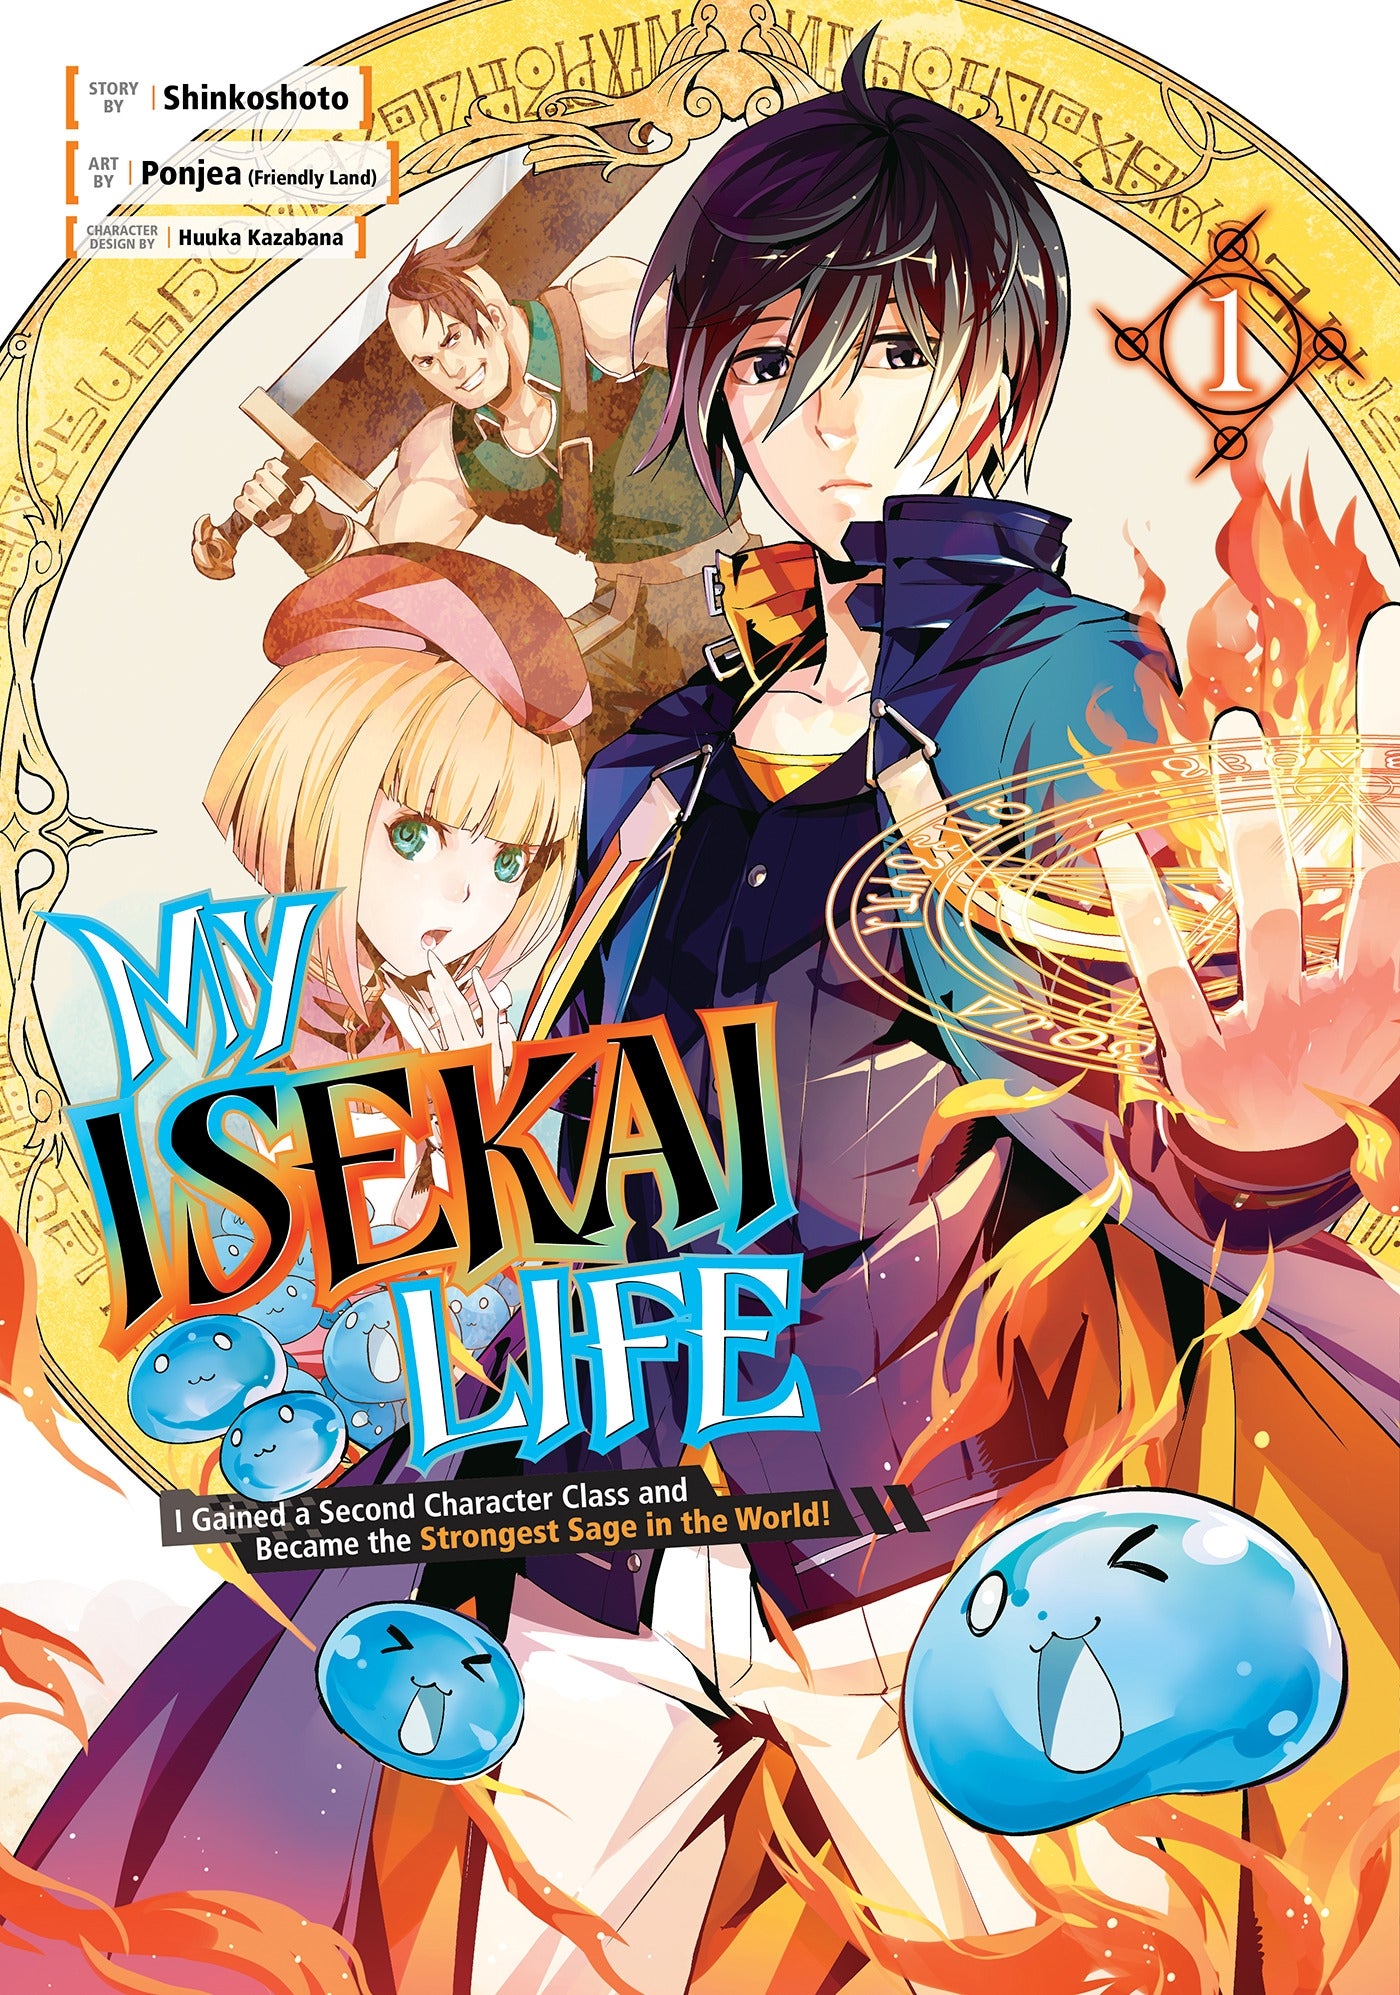 My Isekai Life 01 : I Gained a Second Character Class and Became the Strongest Sage in the World! - Manga Warehouse